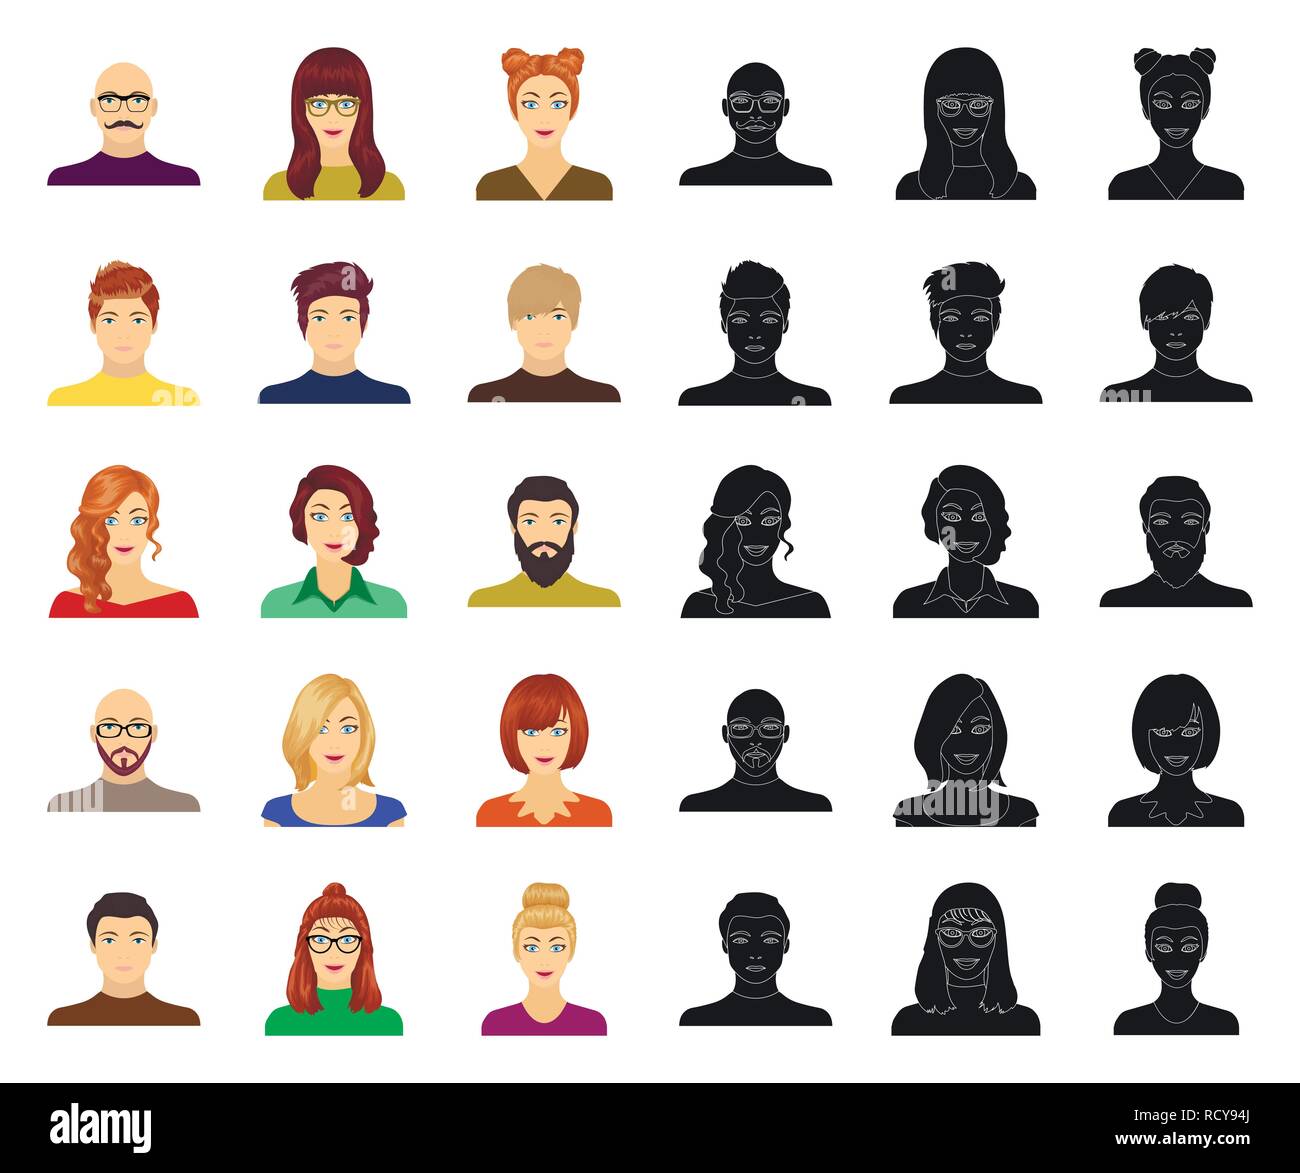 appearance,avatar,bald,beard,blonde,boy ,brunette,bust,cartoon,black,coiffure,collection,curl,design,expression,face,faces,facial, fashion,fringe,girl,glasses,guy,hair,haircut,hairdo,hairstyle ,head,icon,illustration,image,isolated,logo,male,man,mustache ...